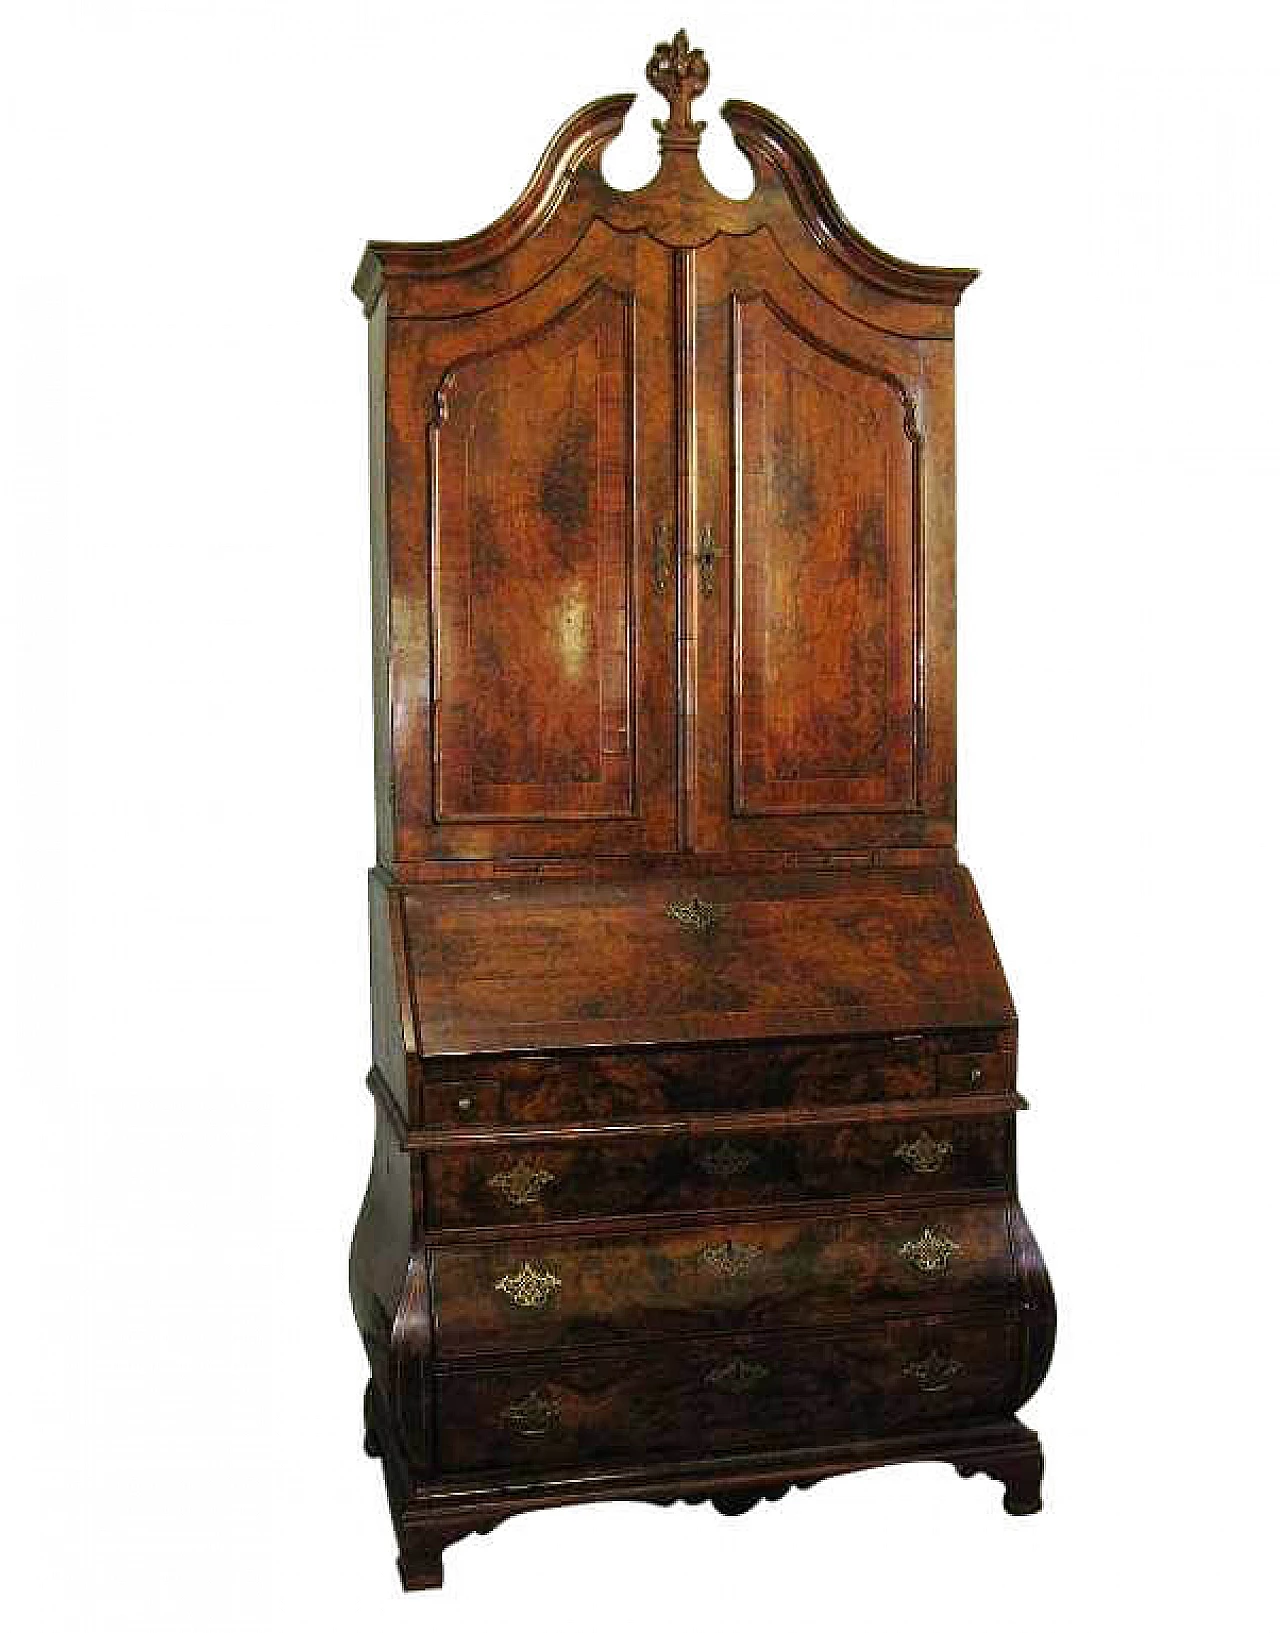 English folding table with riser, early 1800s 1210346